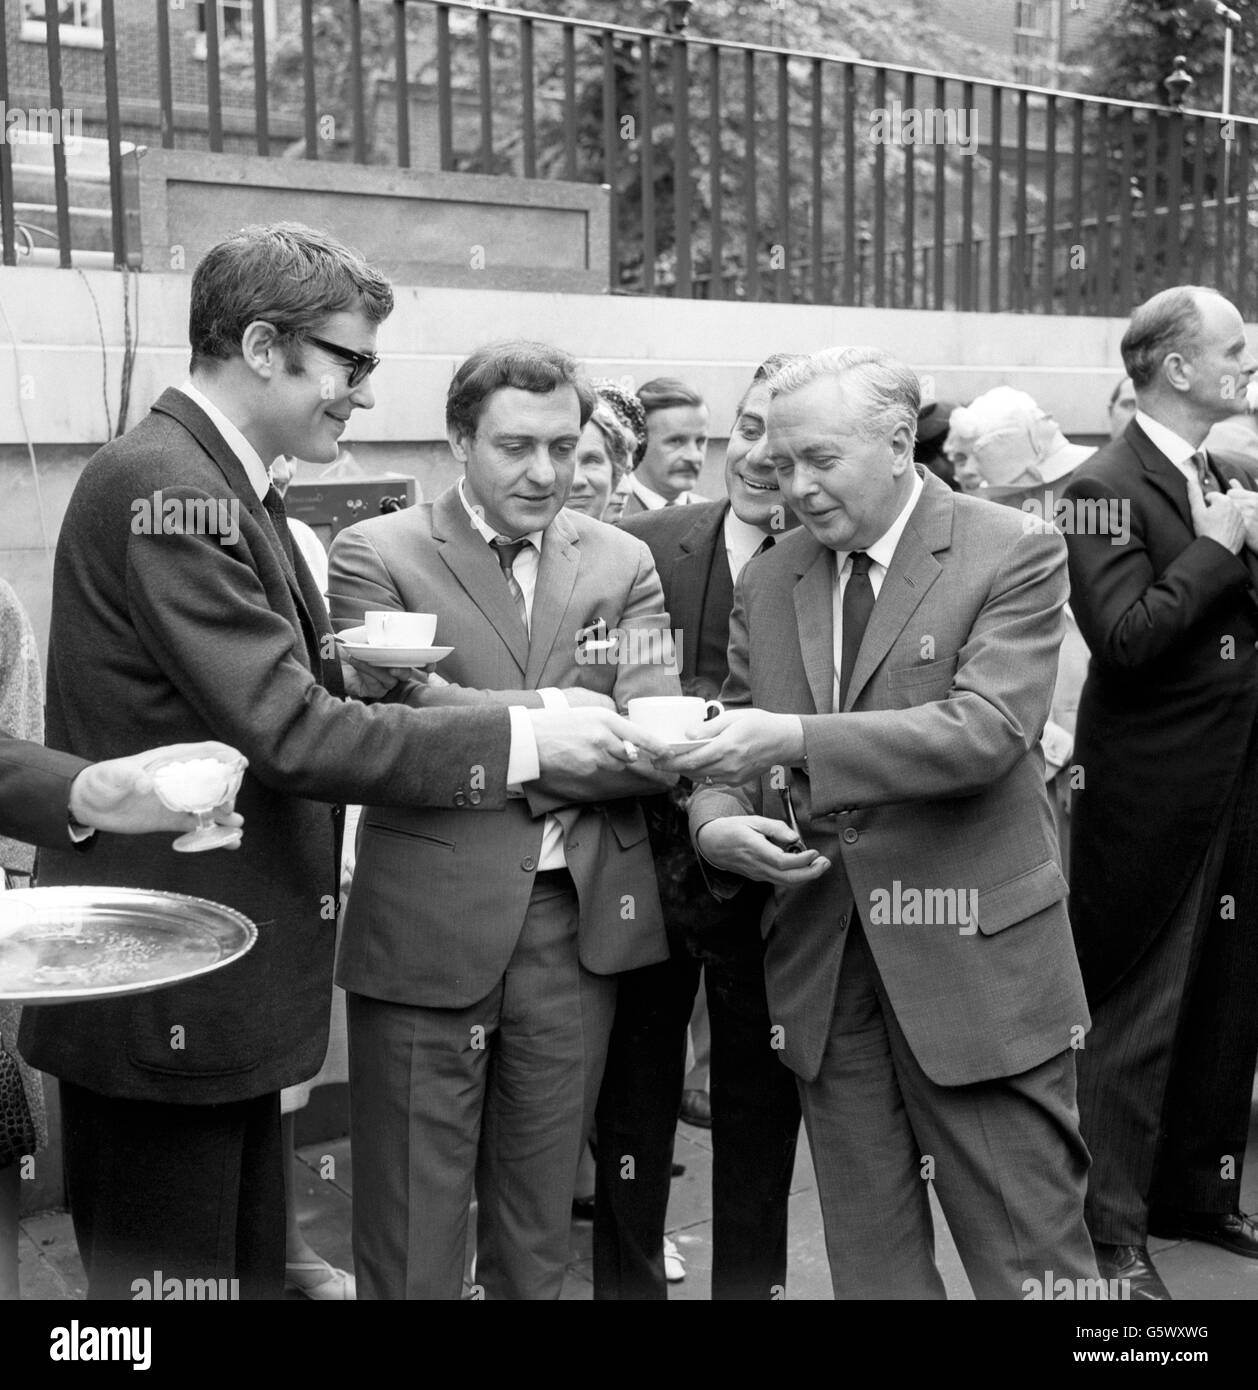 Film star Peter O'Toole hands Prime Minister Harold Wilson a cup of tea at the United Nations Association's (UNA) garden party held at 10 Downing Street, London. In the centre of the picture is Steptoe and Son actor Harry H. Corbett. The garden party was held to raise funds for the Association's work and guests included members of the Diplomatic Corps and prominent people in the Entertainment world. The UNA was founded in 1945 to support and strengthen the United Nations through education, influence and practical activities. Stock Photo